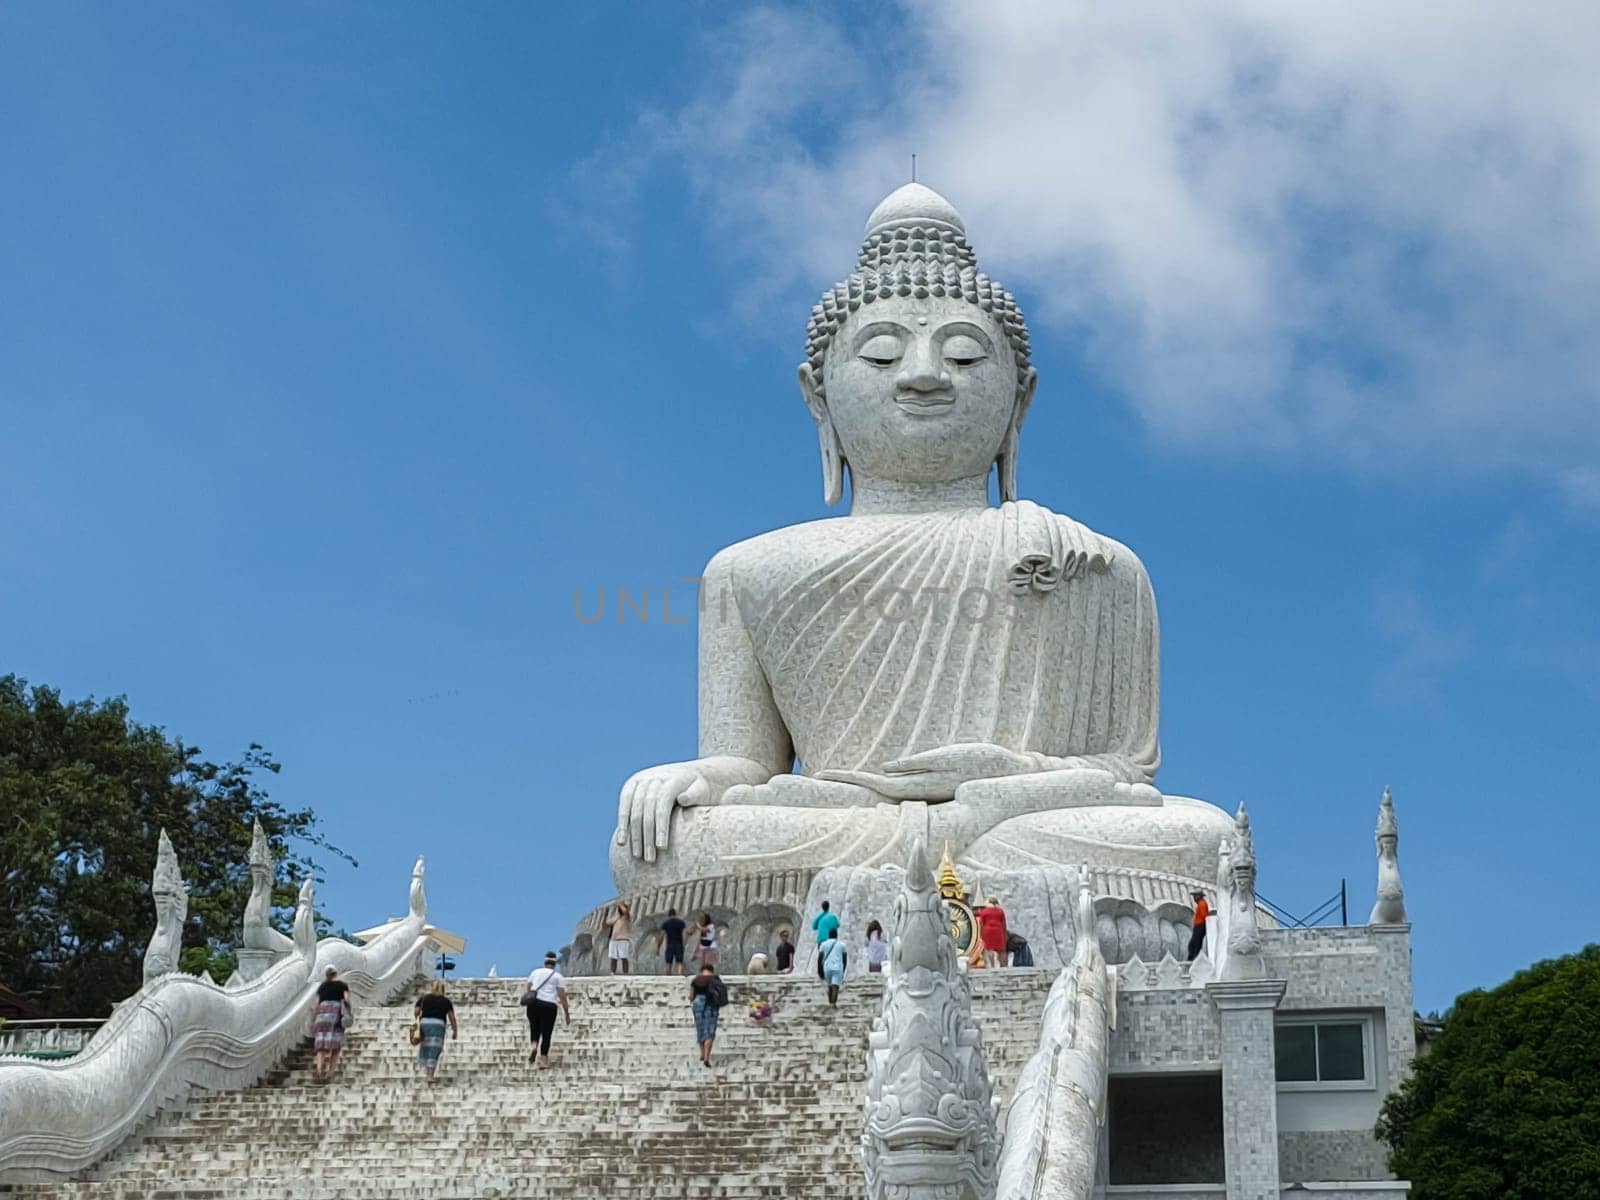 Famous statue of Big Buddha made of marble by day in Phuket, Thailand